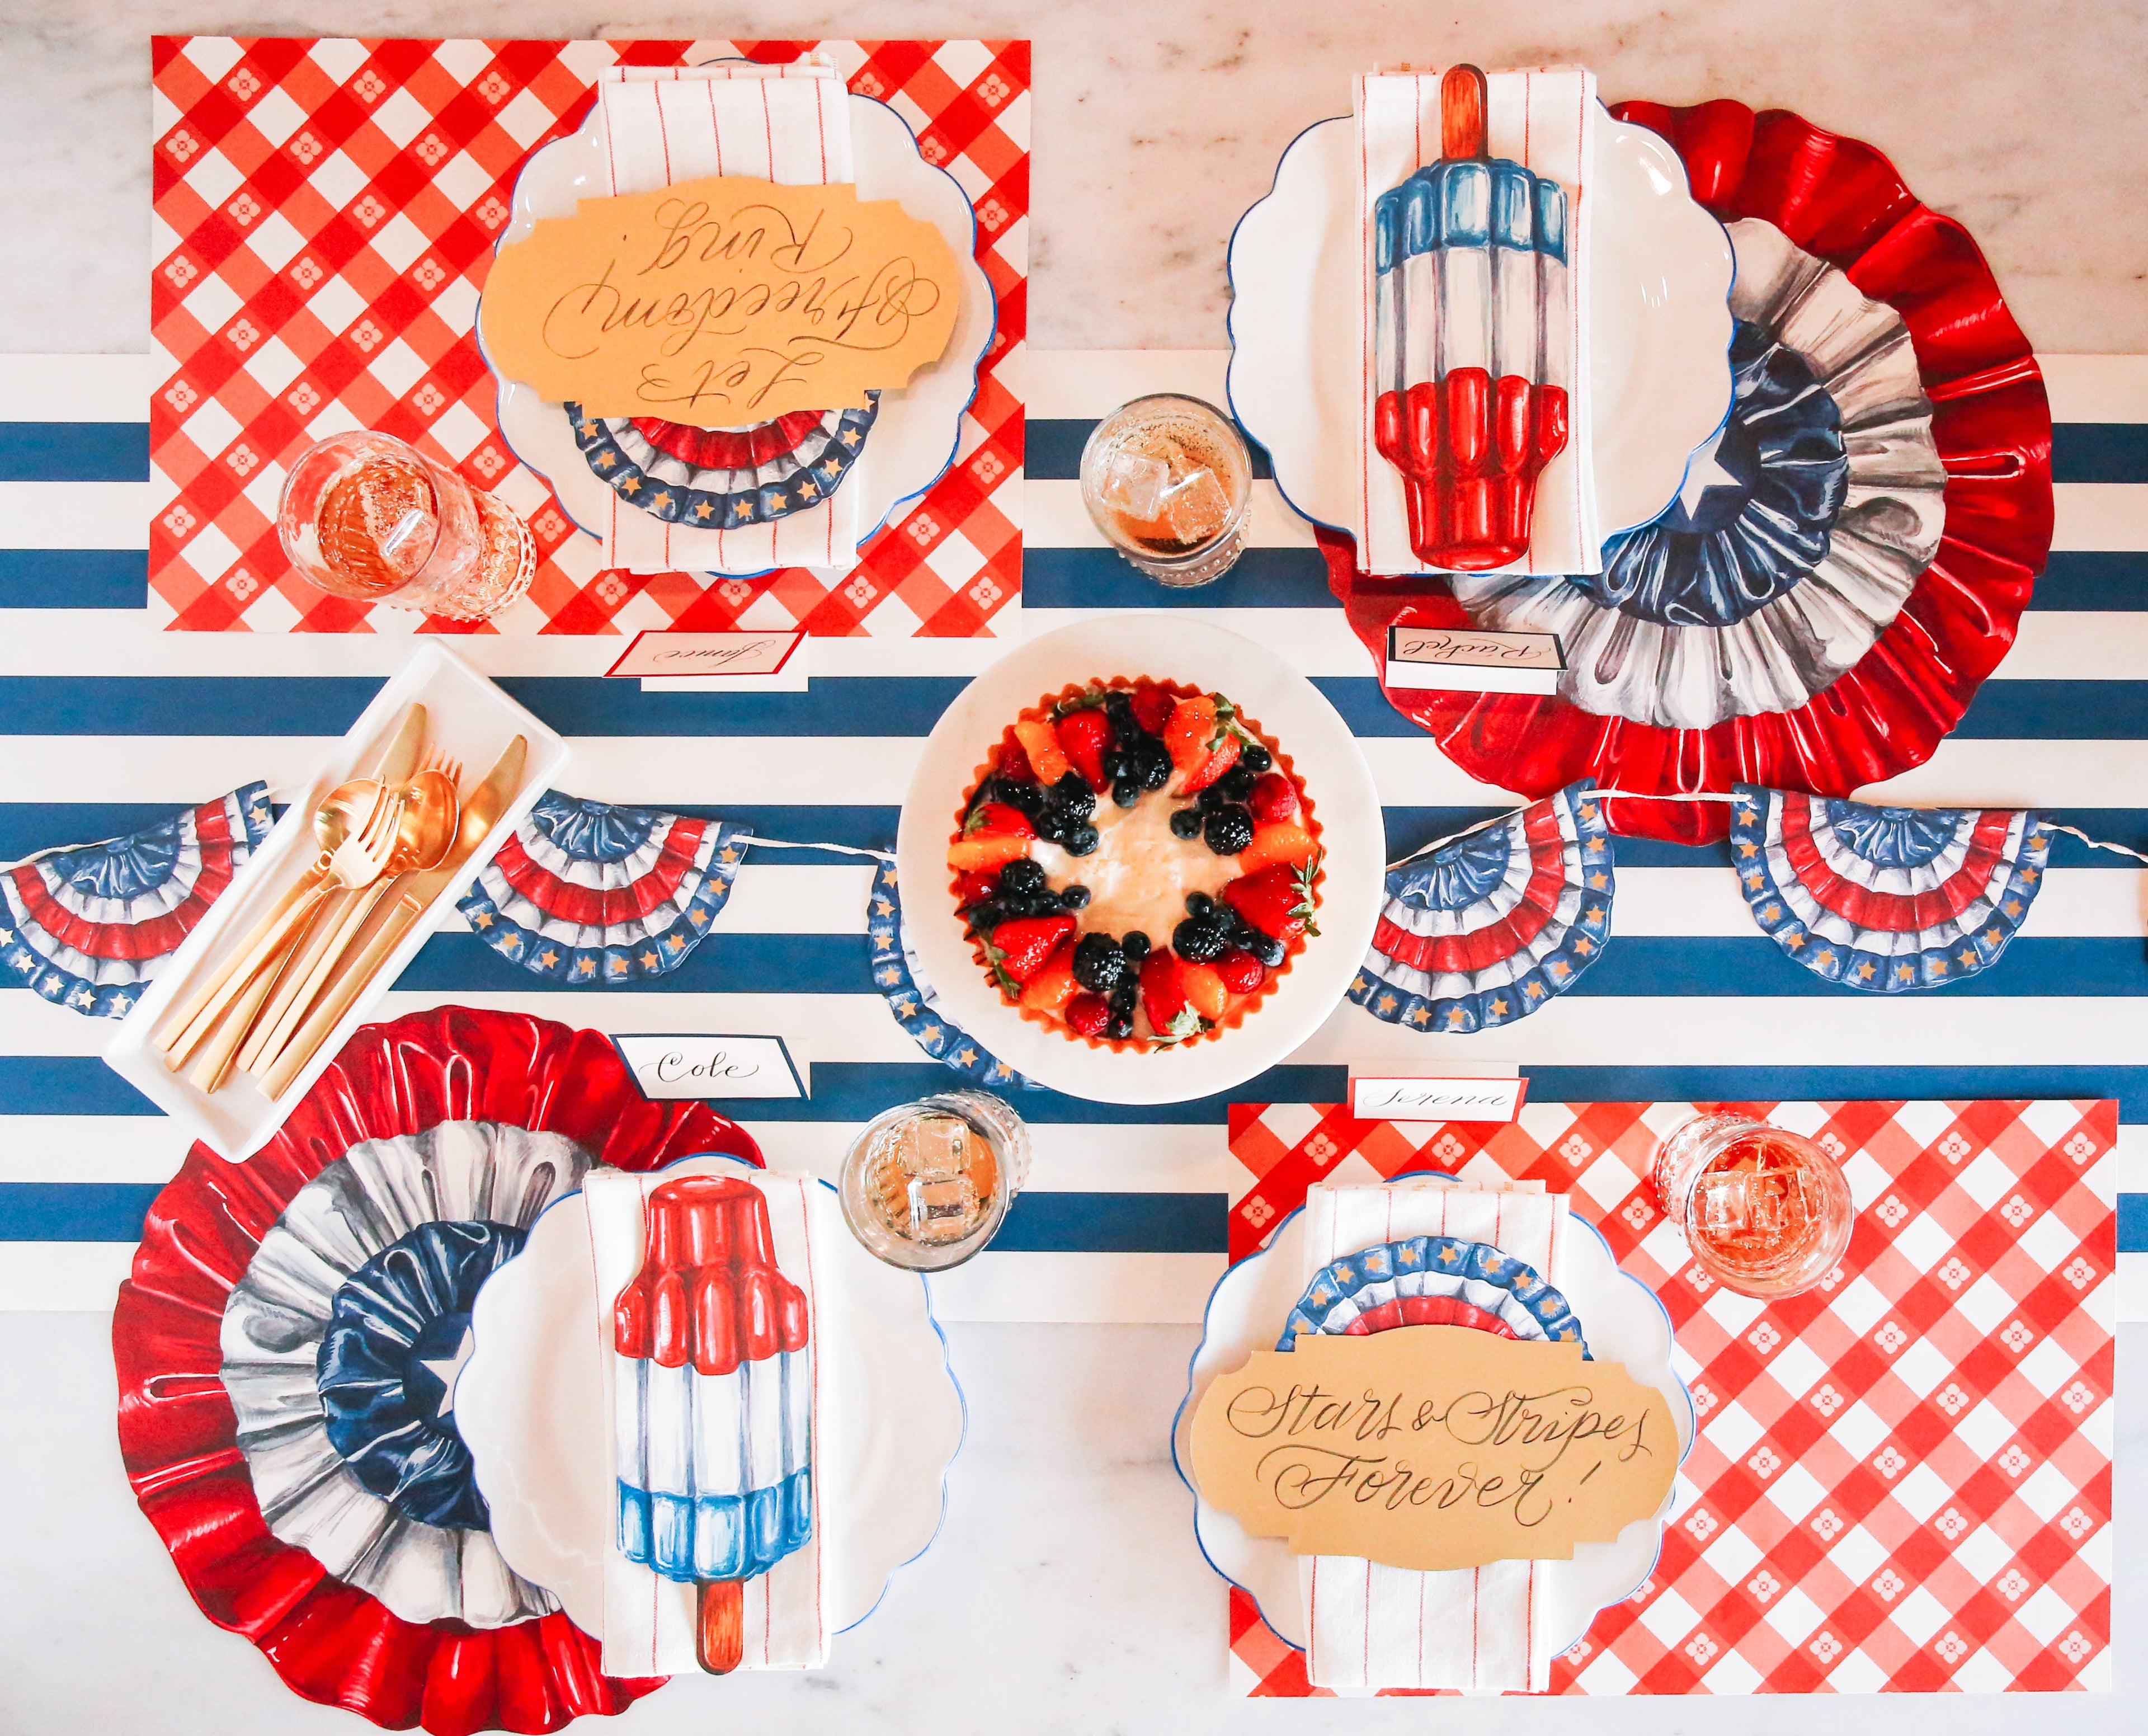 4th of July table setting with a pack of 12 Die-cut Star-Spangled Placemats by Hester &amp; Cook and red, white, and blue decorations.